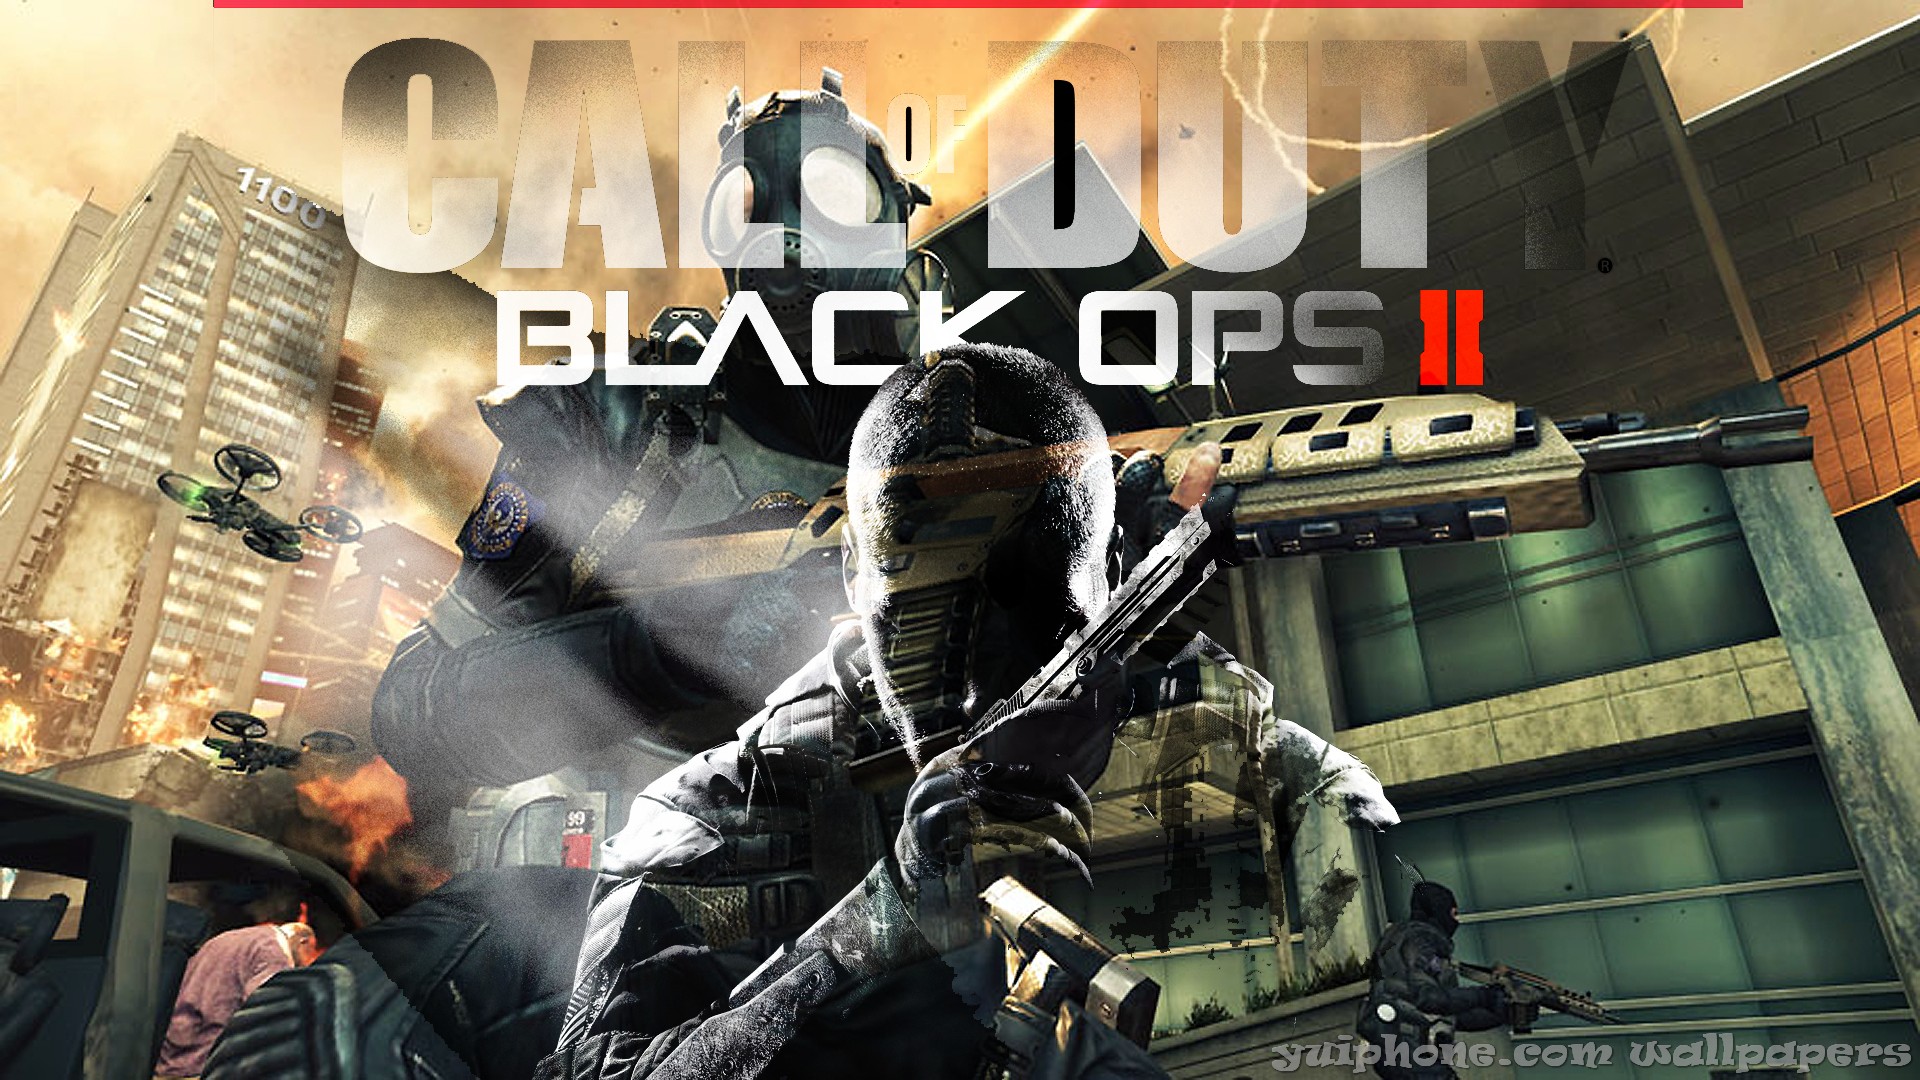 Call of Duty   Black Ops II wallpaper   Game wallpapers   10908